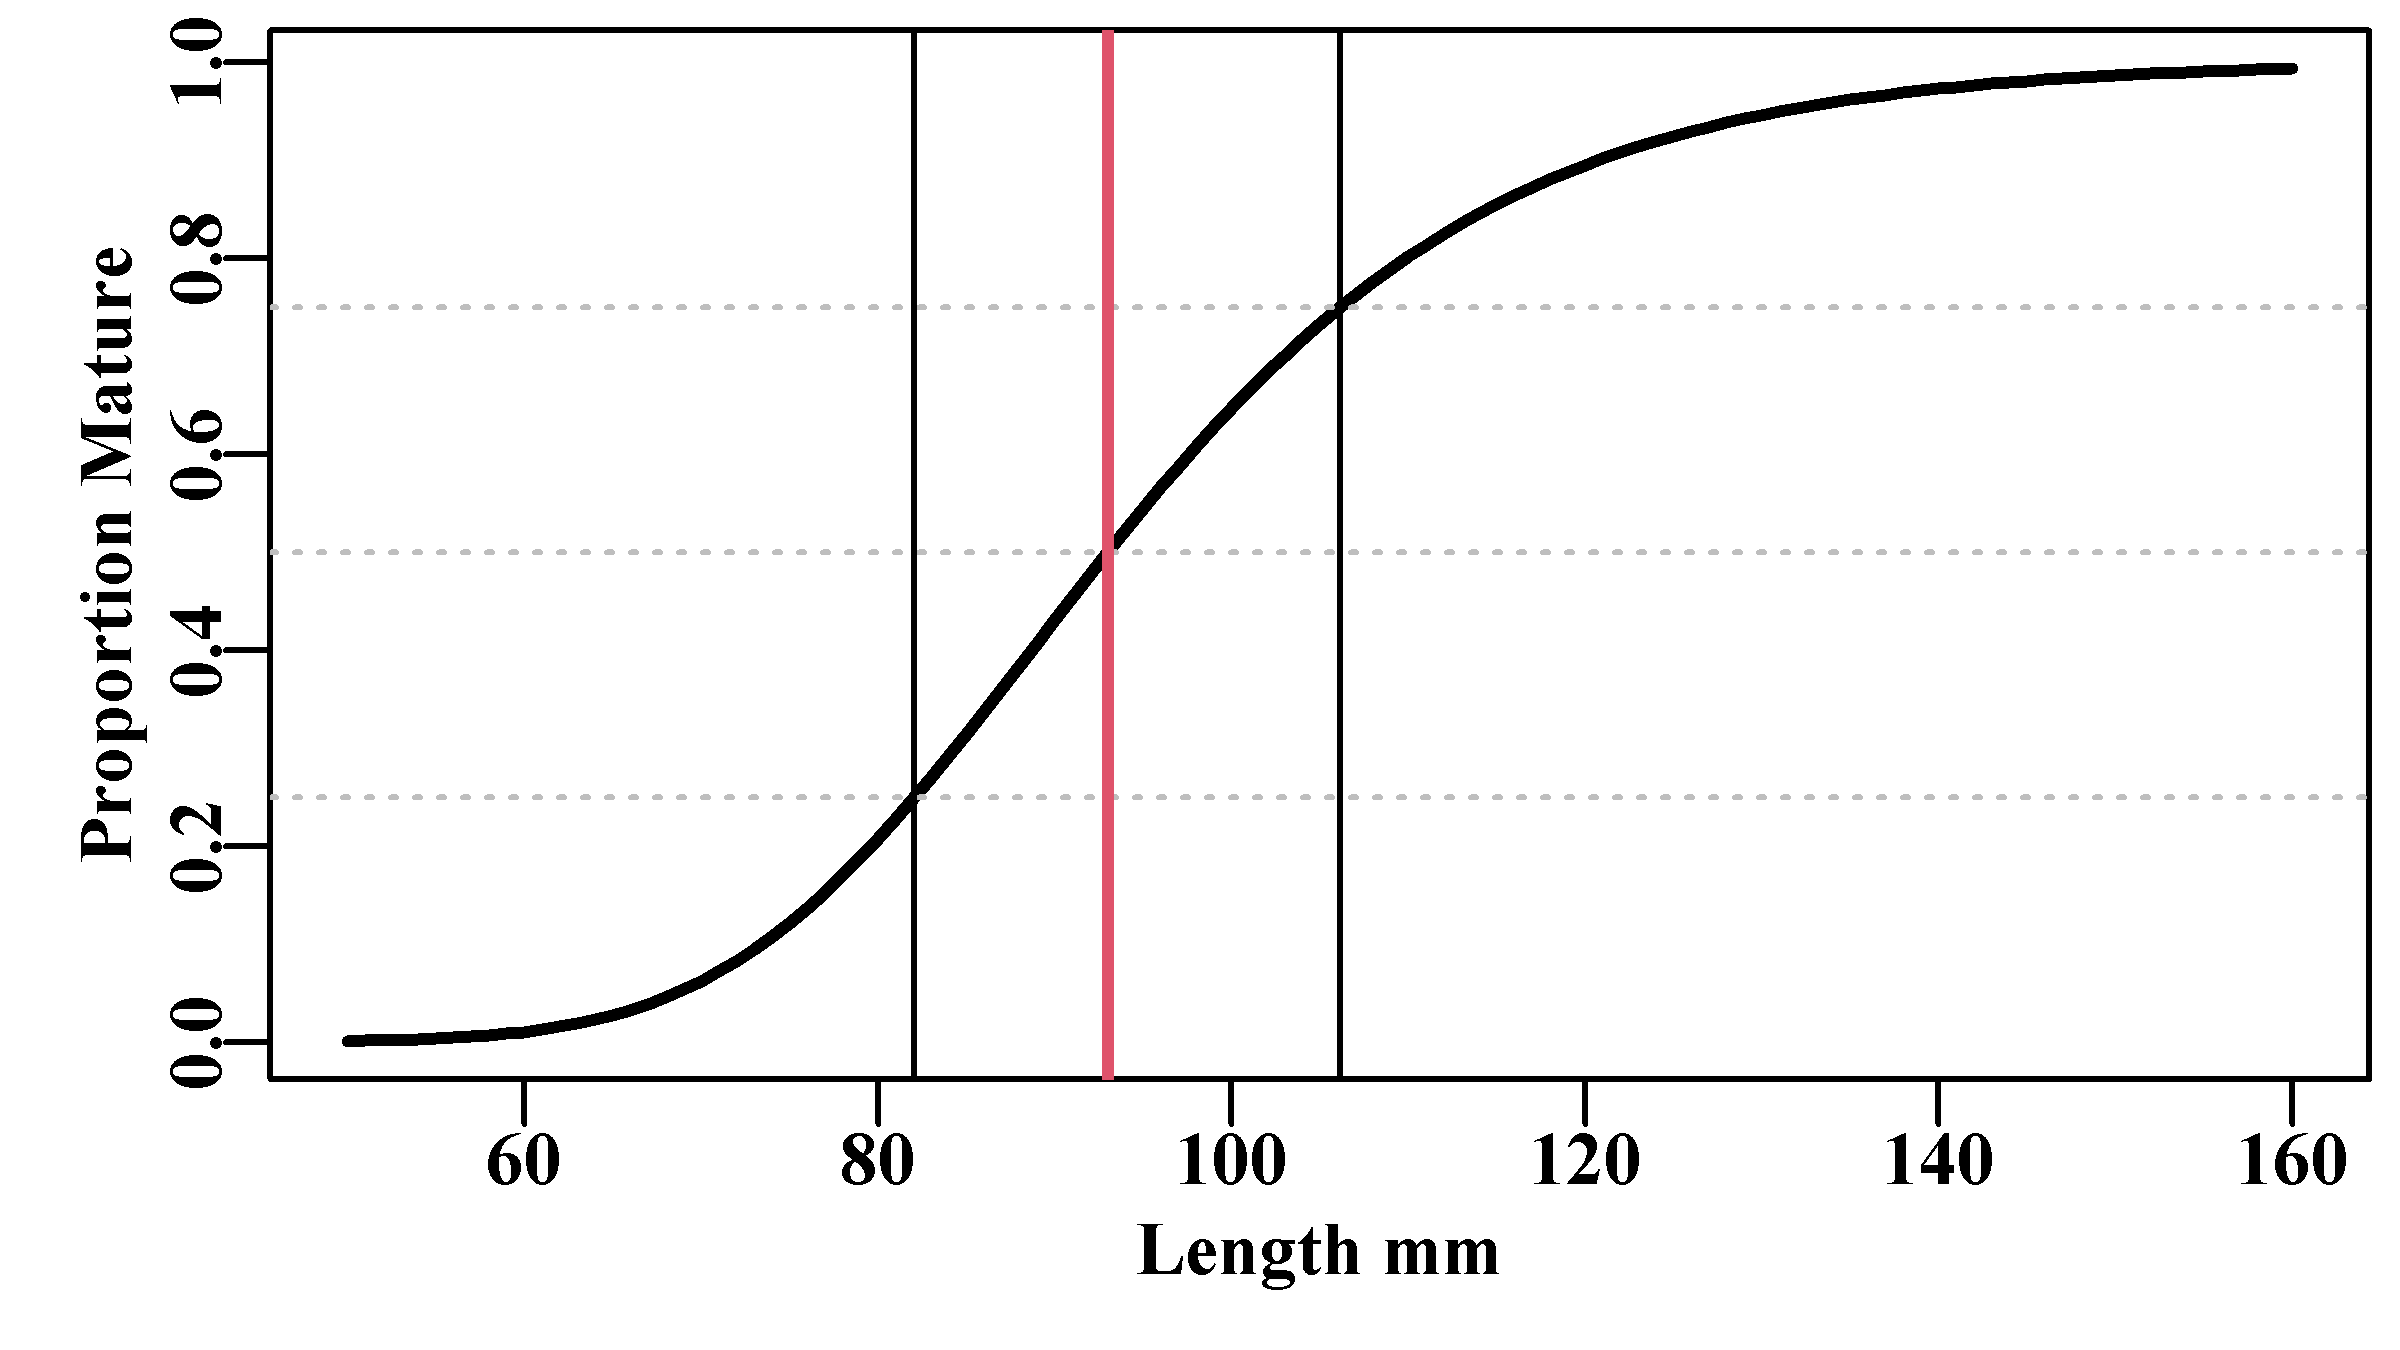 The proportion mature at length for a hypothetical example using the Schnute and Richards unified growth curve. The asymmetry of this logistic curve is illustrated by the difference between the left and right hand sides of the inter-quartile distance shown by the green lines.